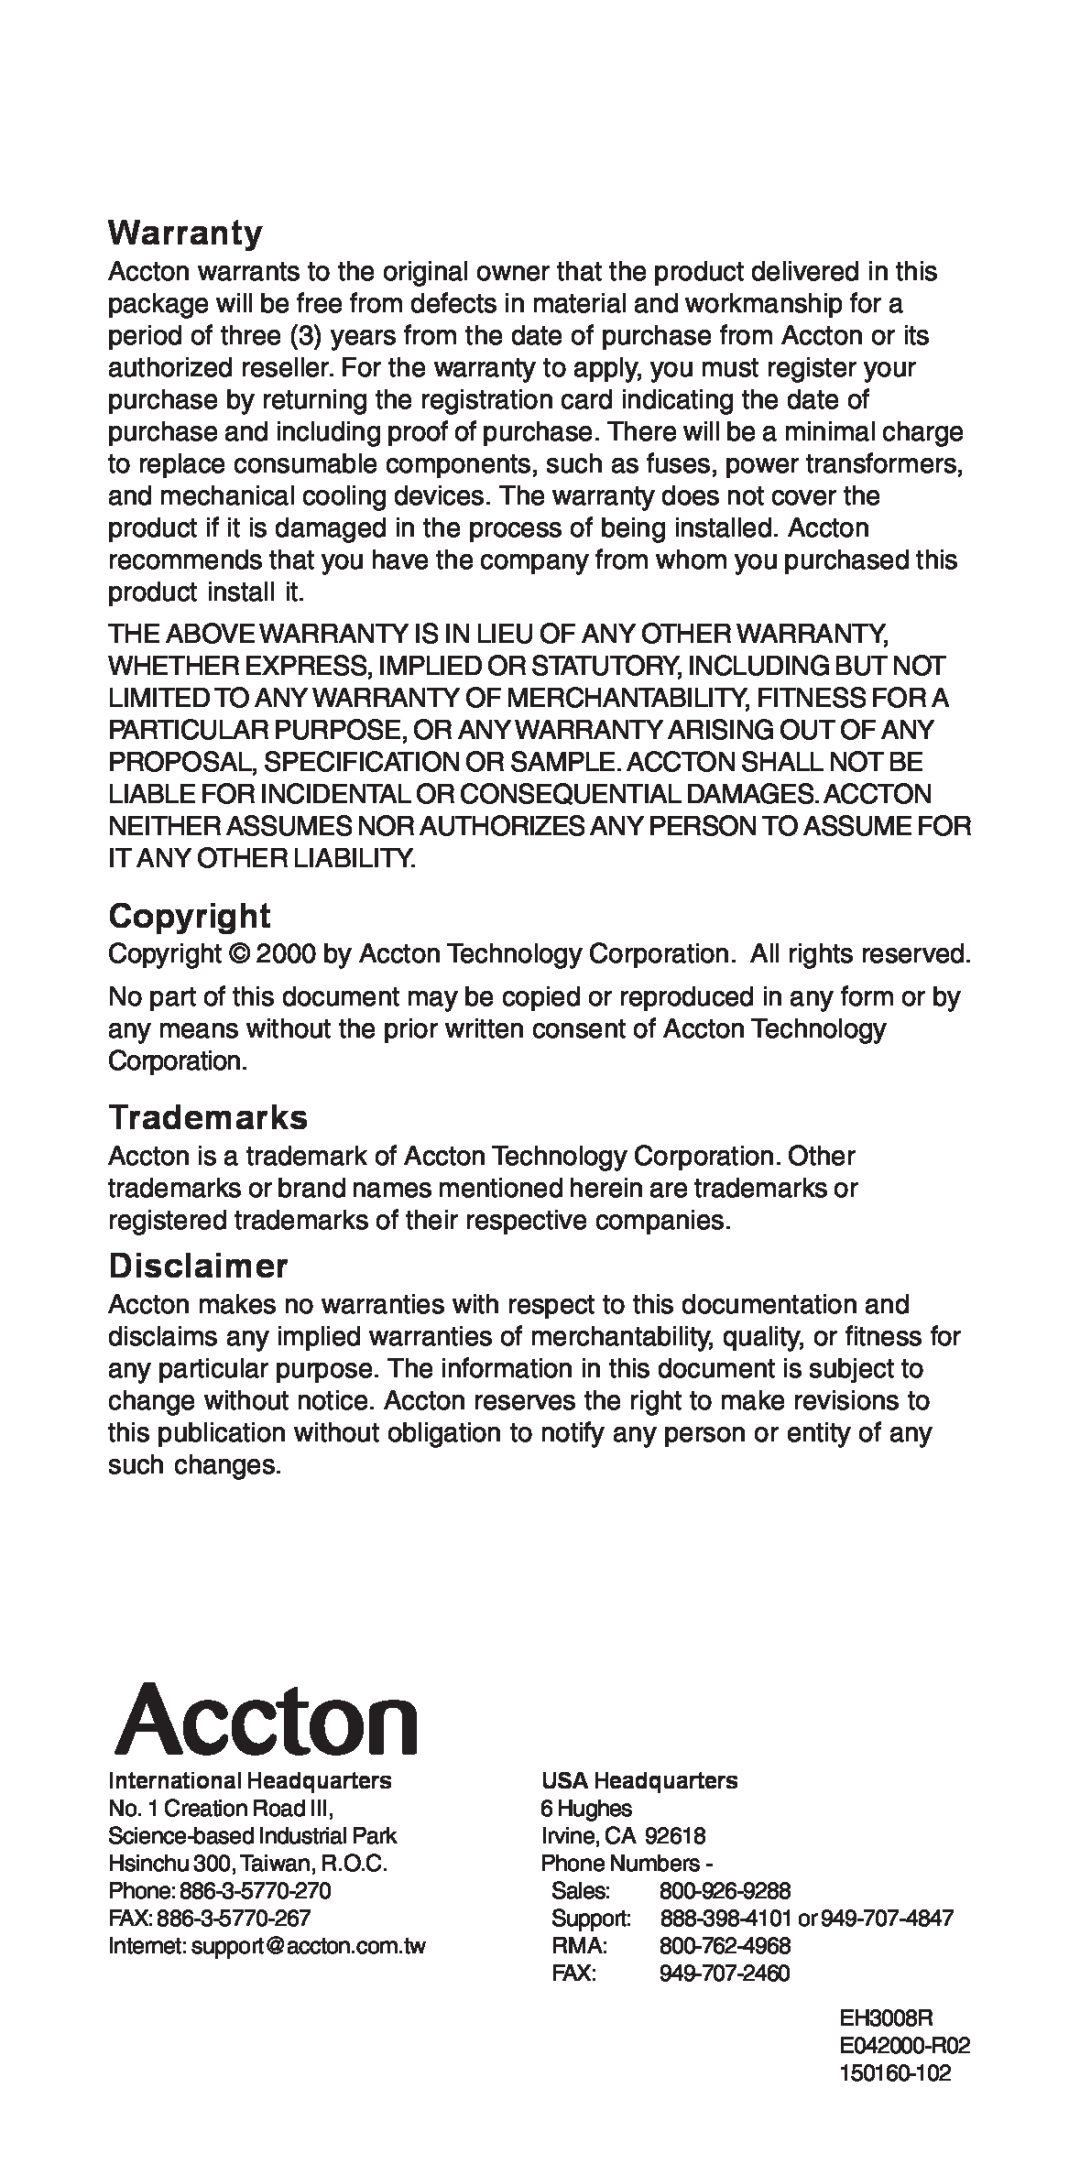 Accton Technology 3008R manual Warranty, Copyright, Trademarks, Disclaimer 